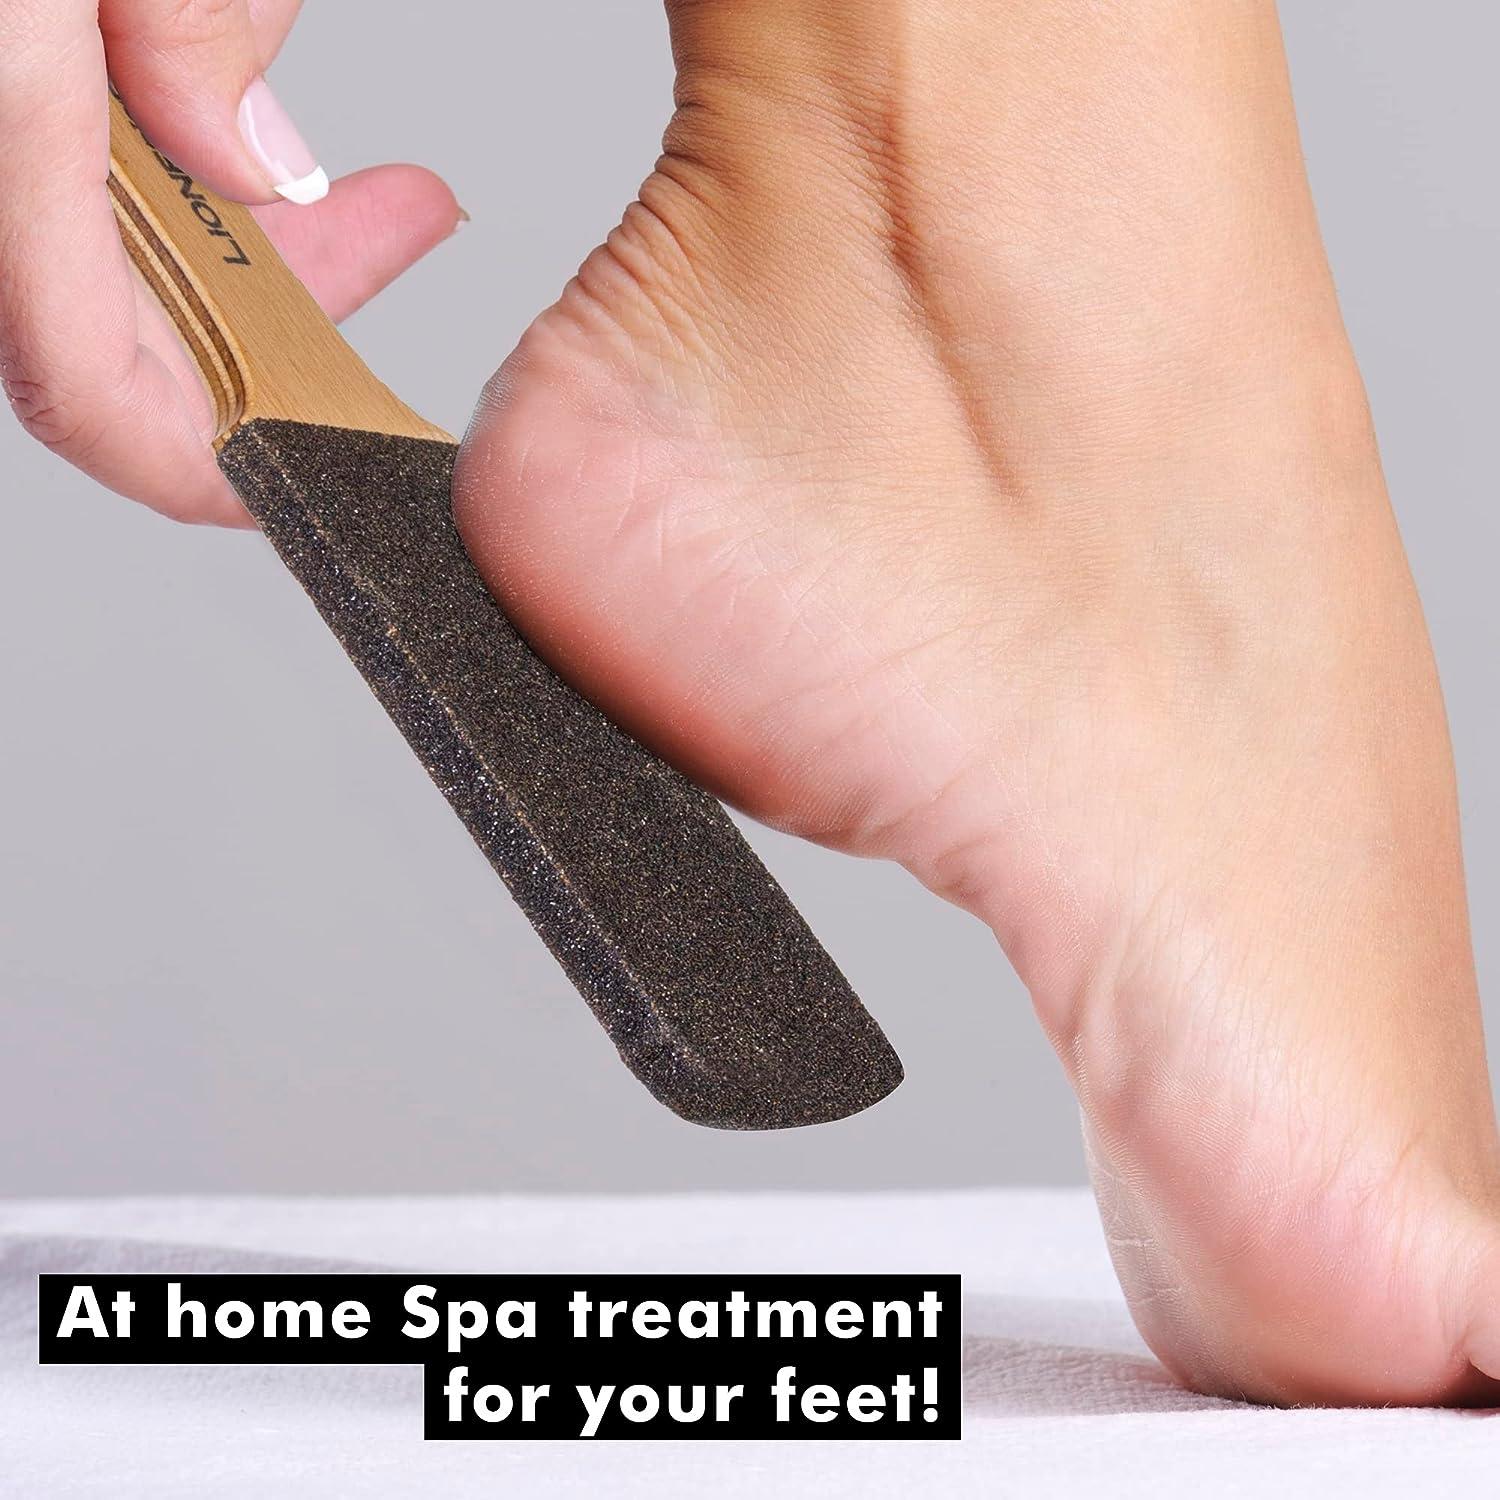  Pumice Stone Foot File, 2 Pack Callus Remover for Feet with  Wooden Handle, Pedicure Foot Scrubber to Remove Dead Skin, Dry, Rough,  Corns Skin Scraper : Beauty & Personal Care